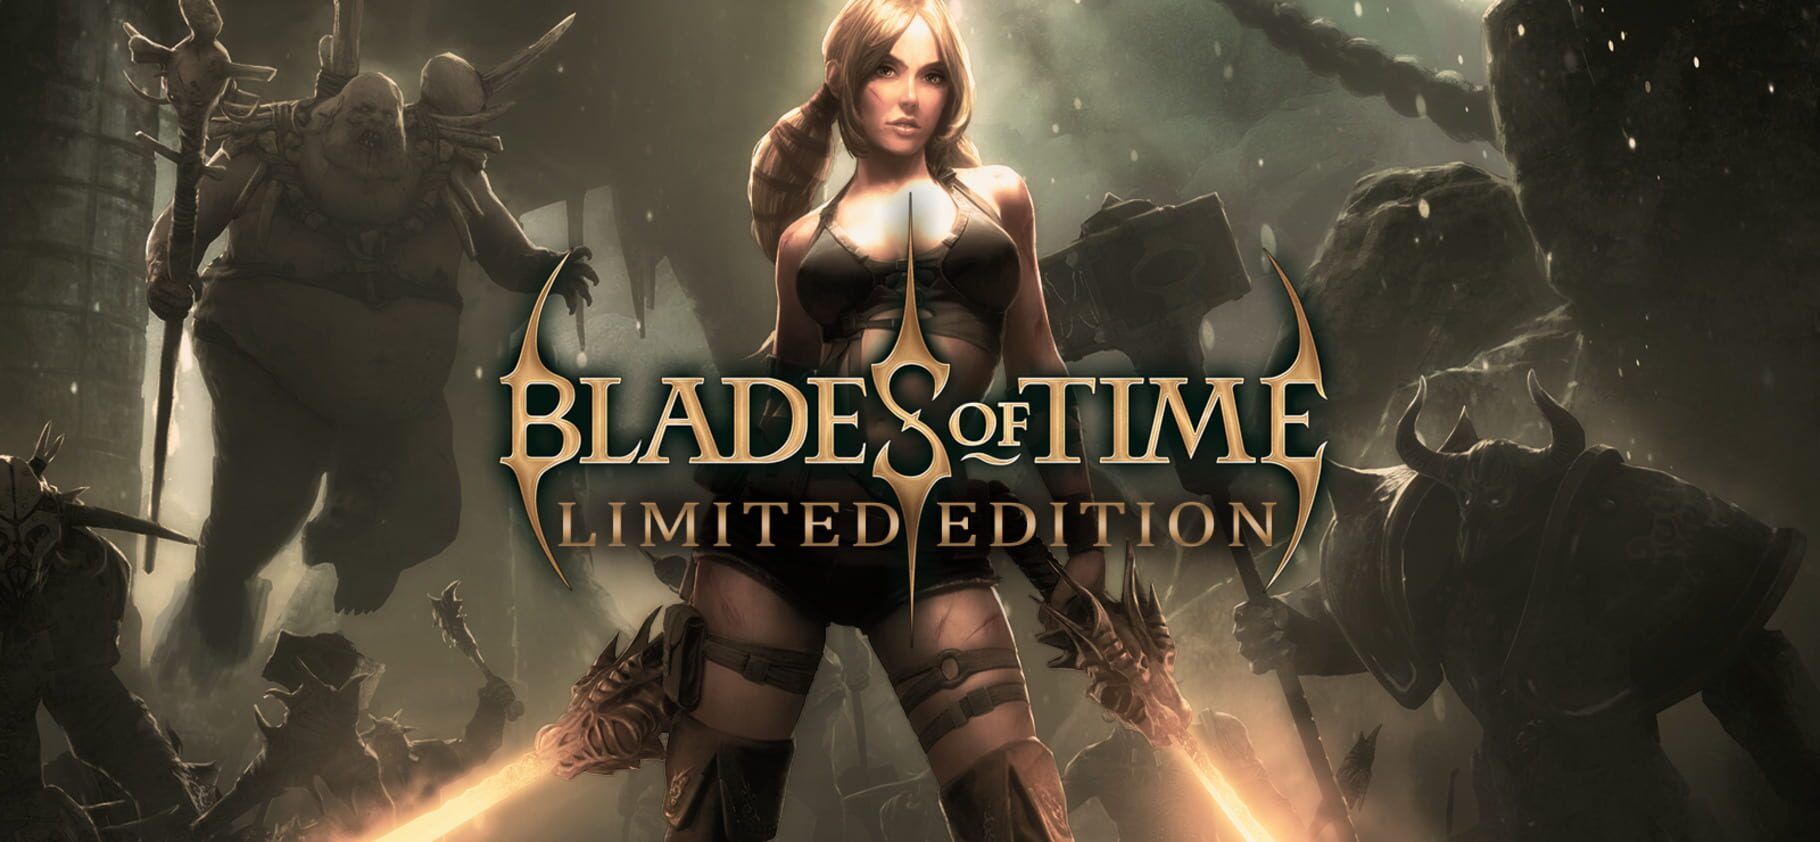 Blades of Time: Limited Edition artwork